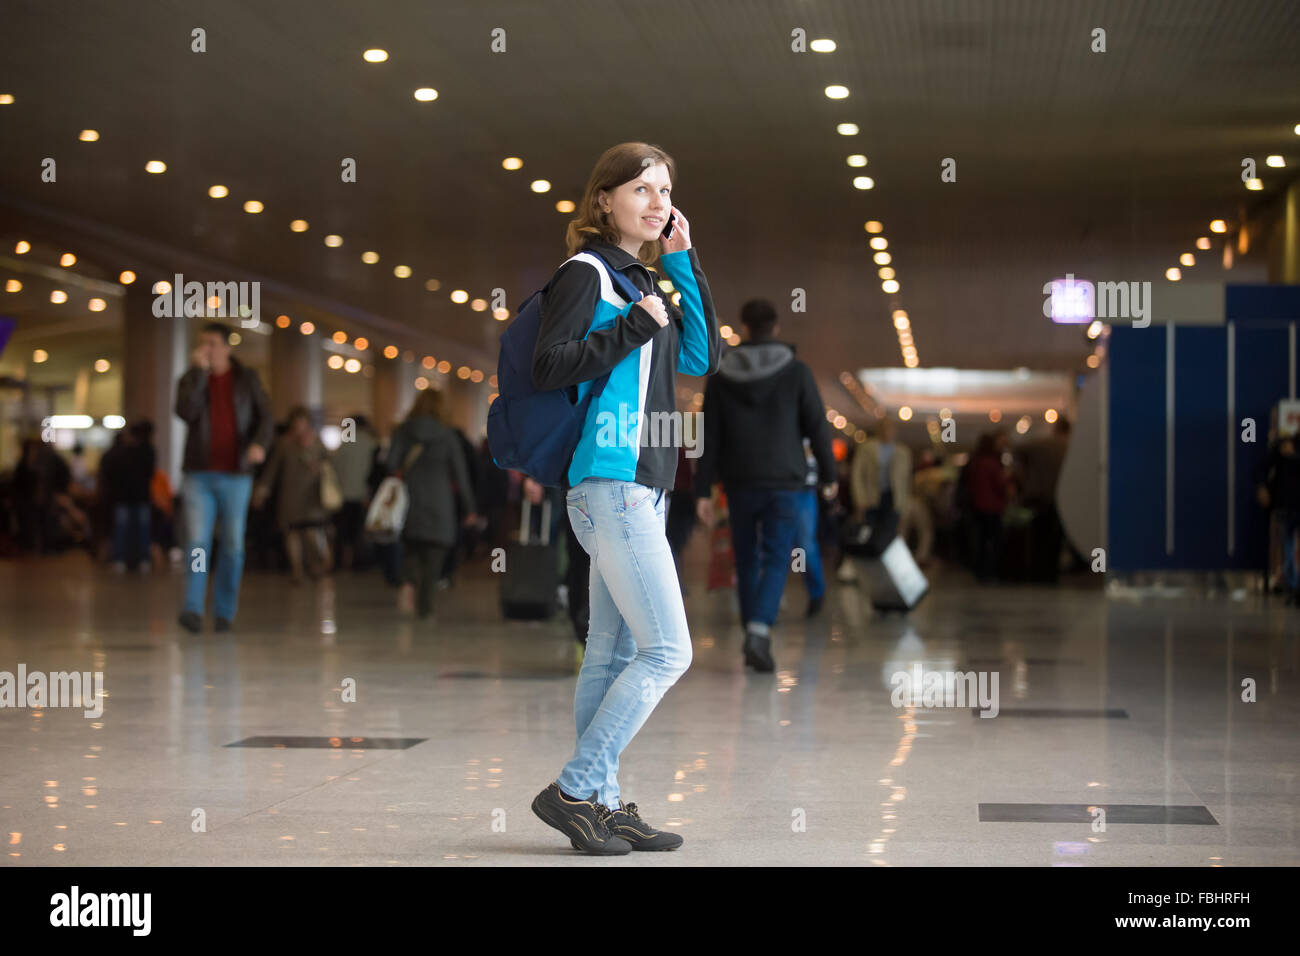 Smiling young woman in 20s with backpack walking in airport terminal, using cell phone, making call, wearing jersey, jeans and s Stock Photo